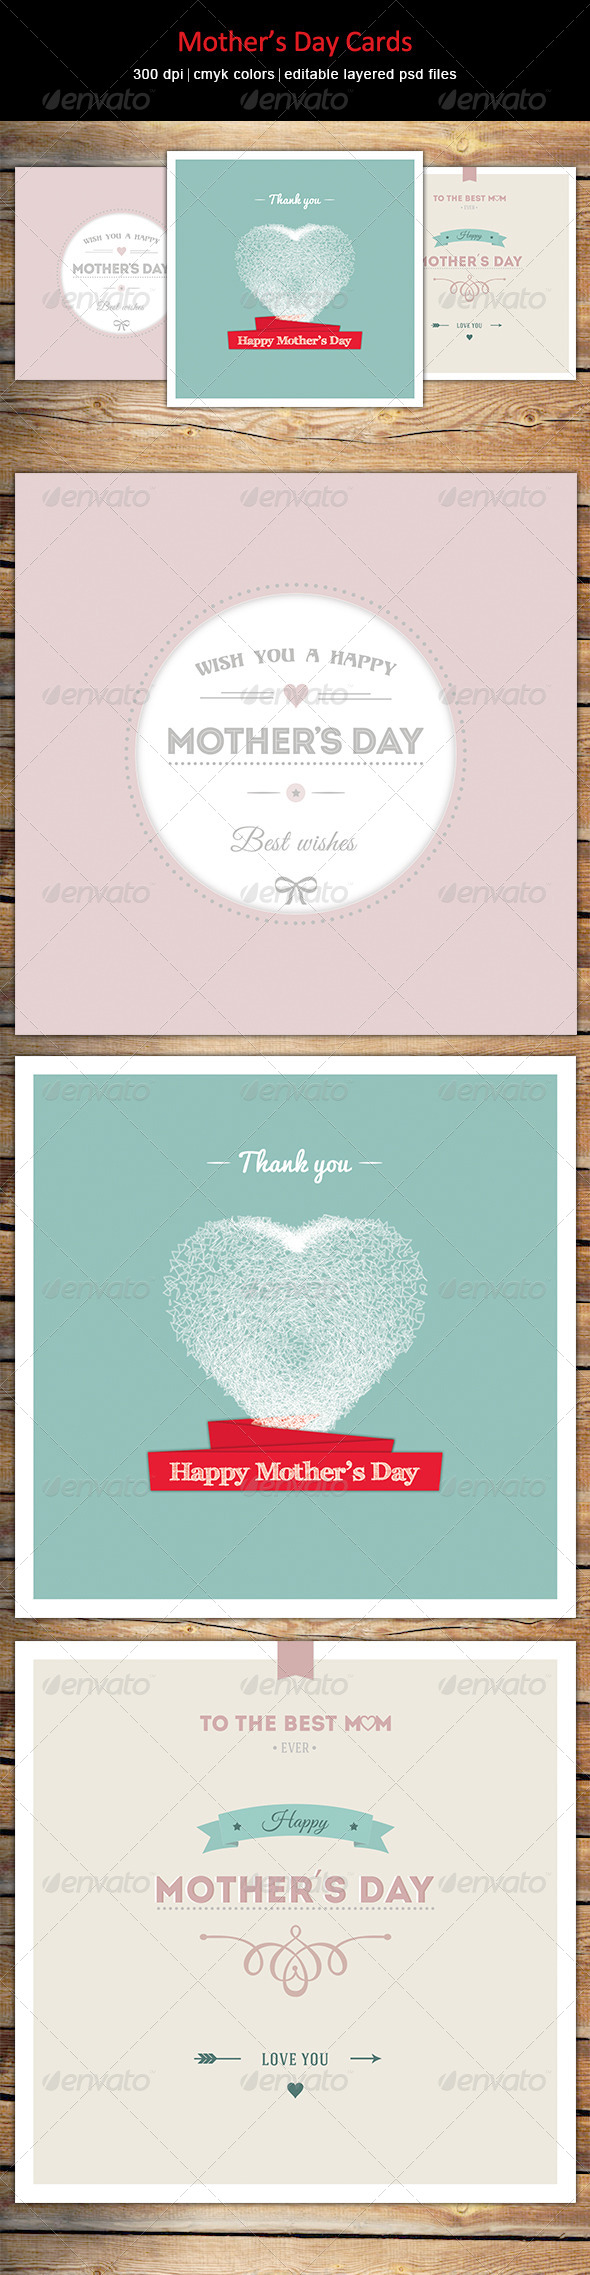 Mother's Day Roundup: Gifts, Cards, Design Elements 11